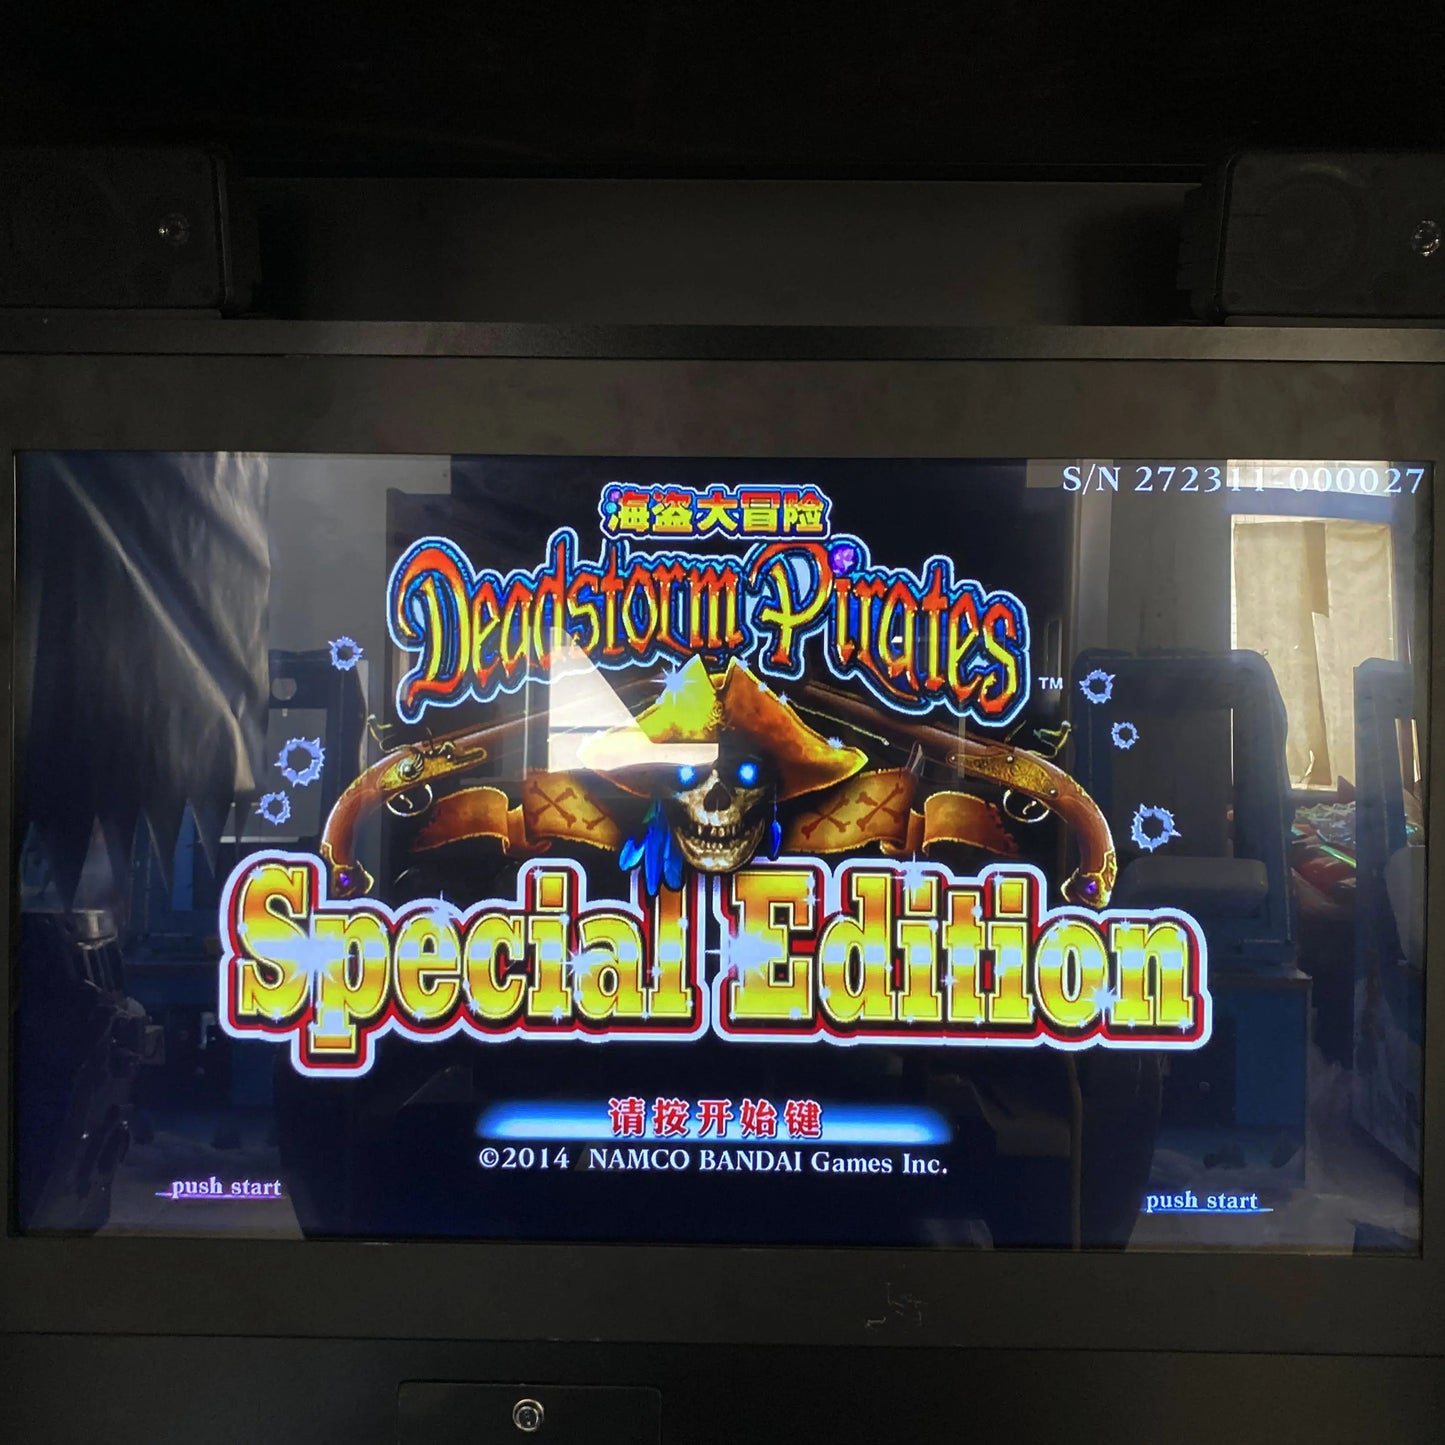 Deadstorm-Pirates-Shooting-Gun-Game-Machine-With-Dynamic-platform-Specal-Edition-Special-Coin-Operated-Wholesales-Arcade-Games-Tomy-Arcade